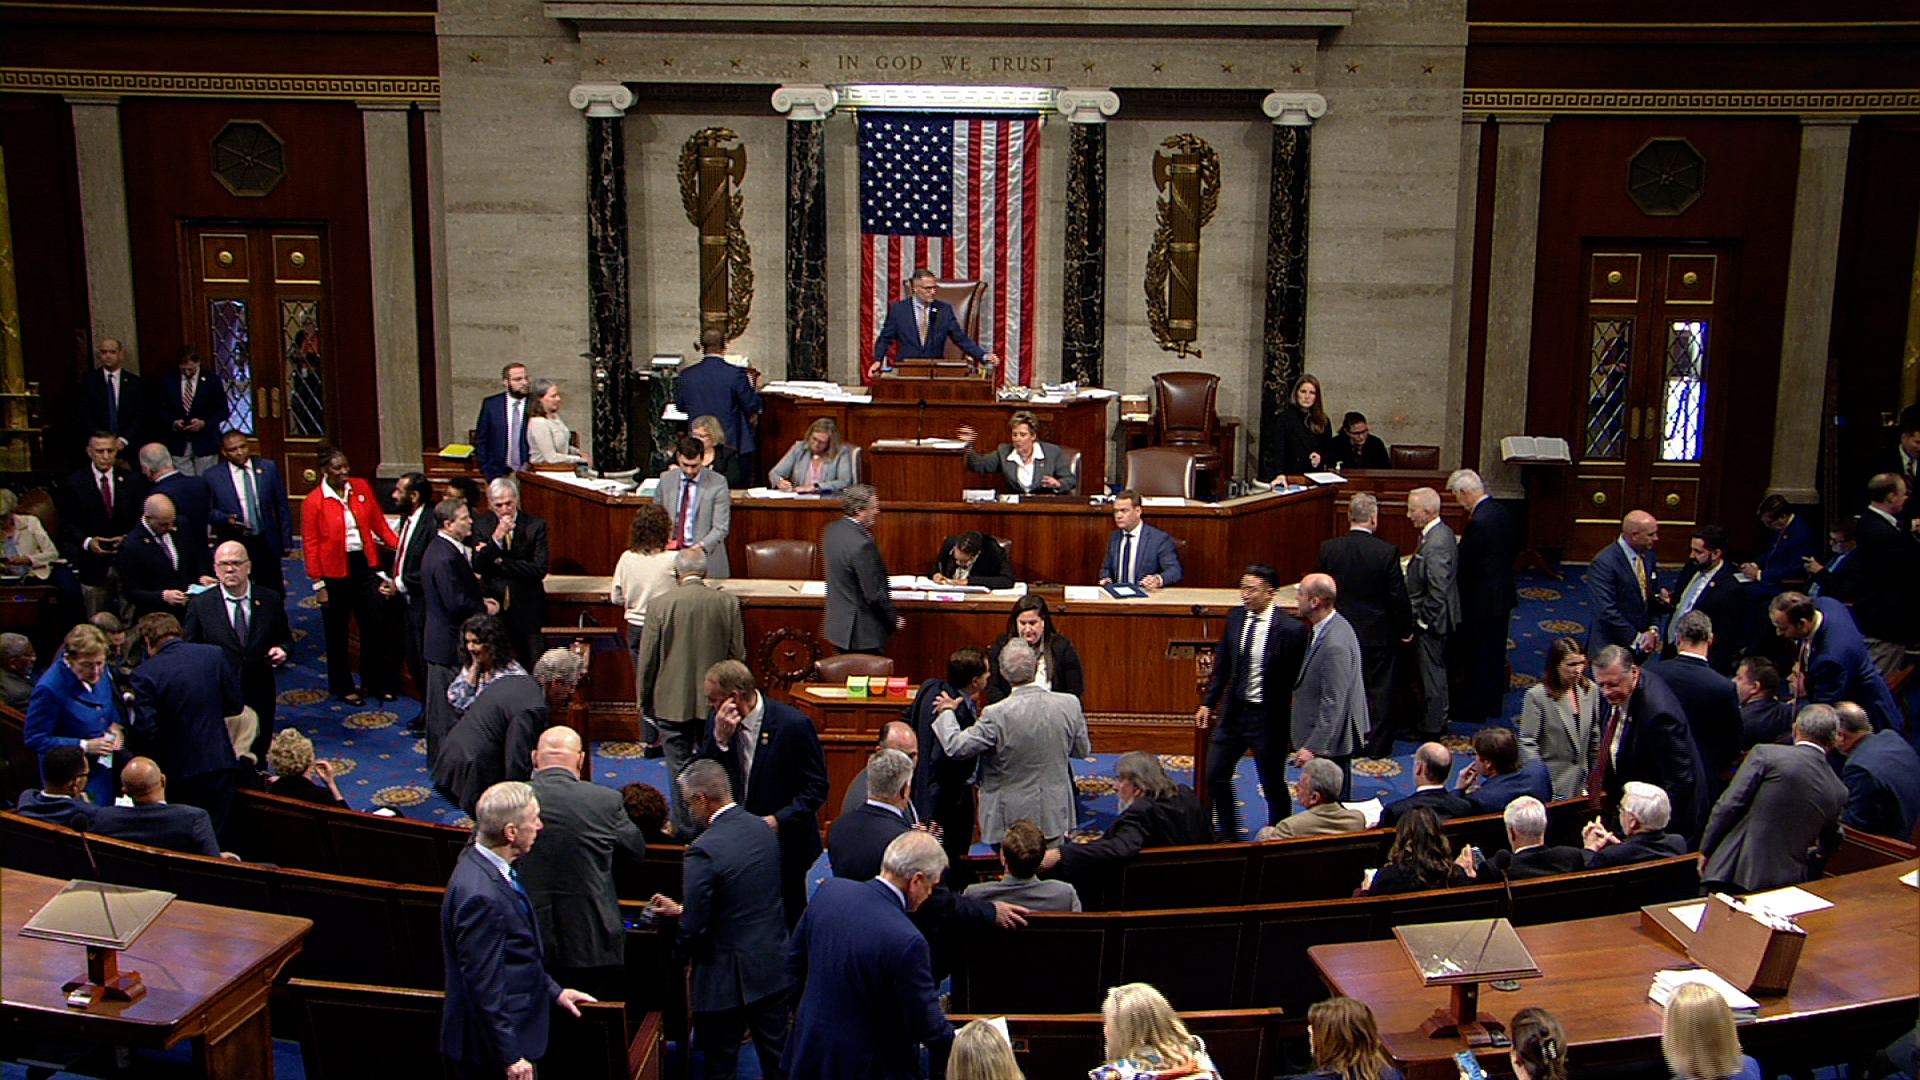 Members of the United States Congress are pictured during voting in the House Chamber in Washington, DC, on April 20.